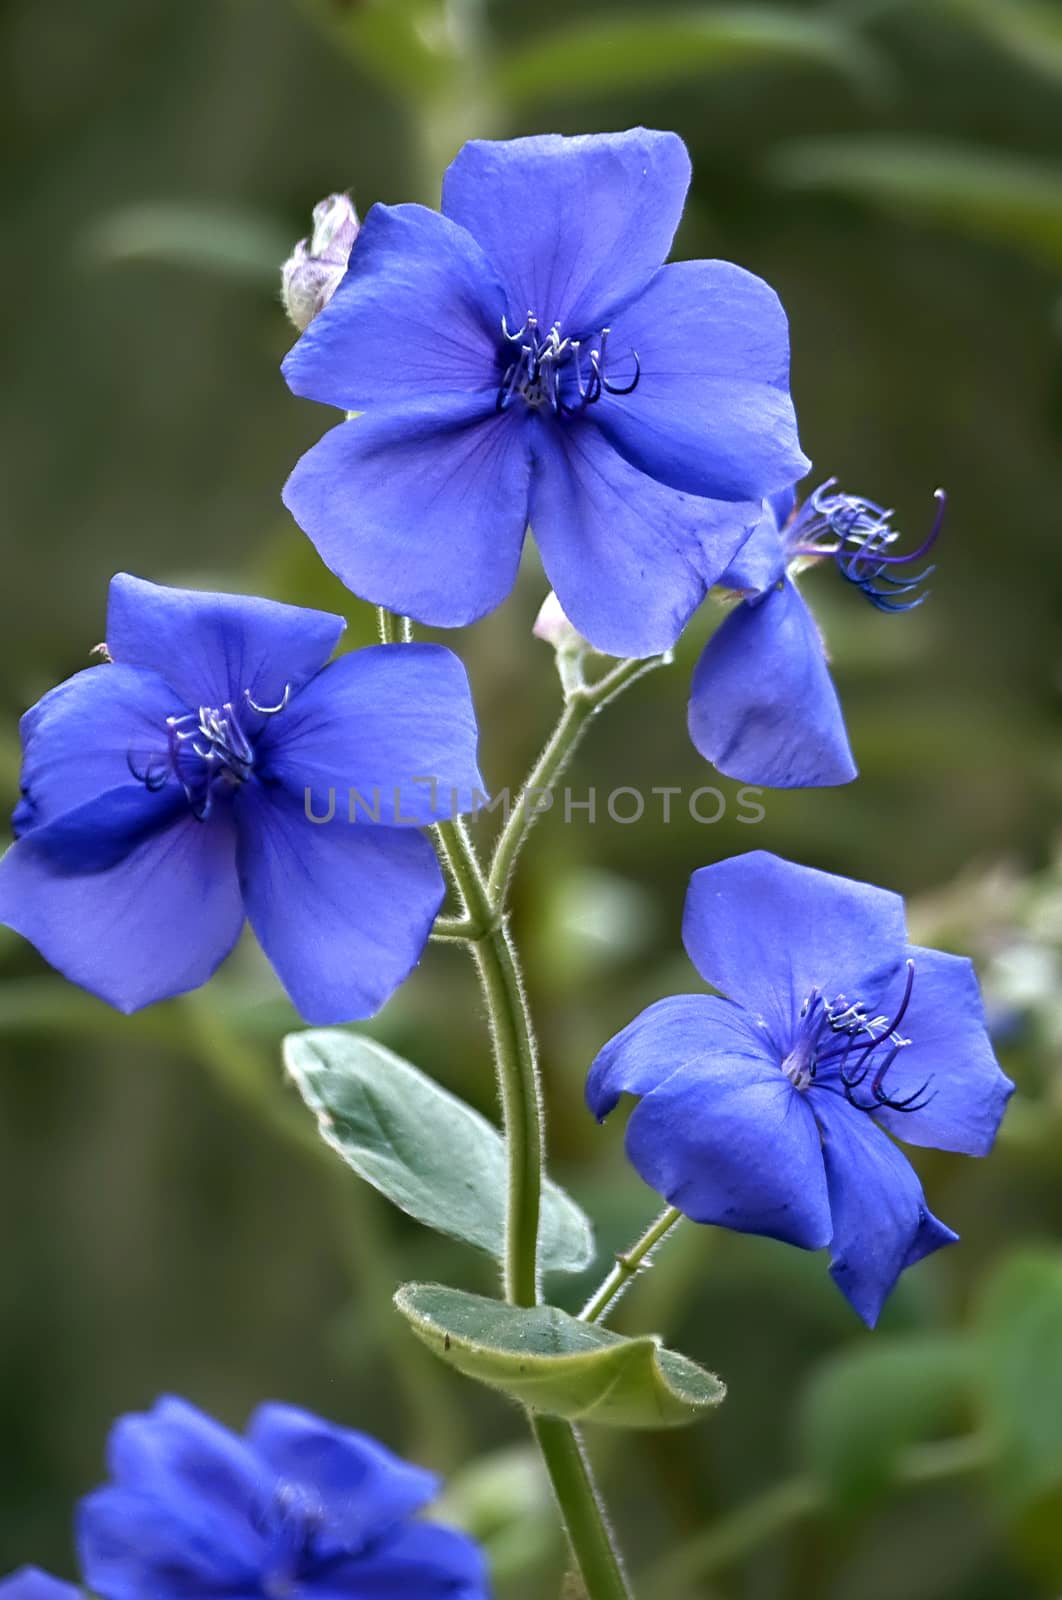 Three blue flowers in a garden on a green background.